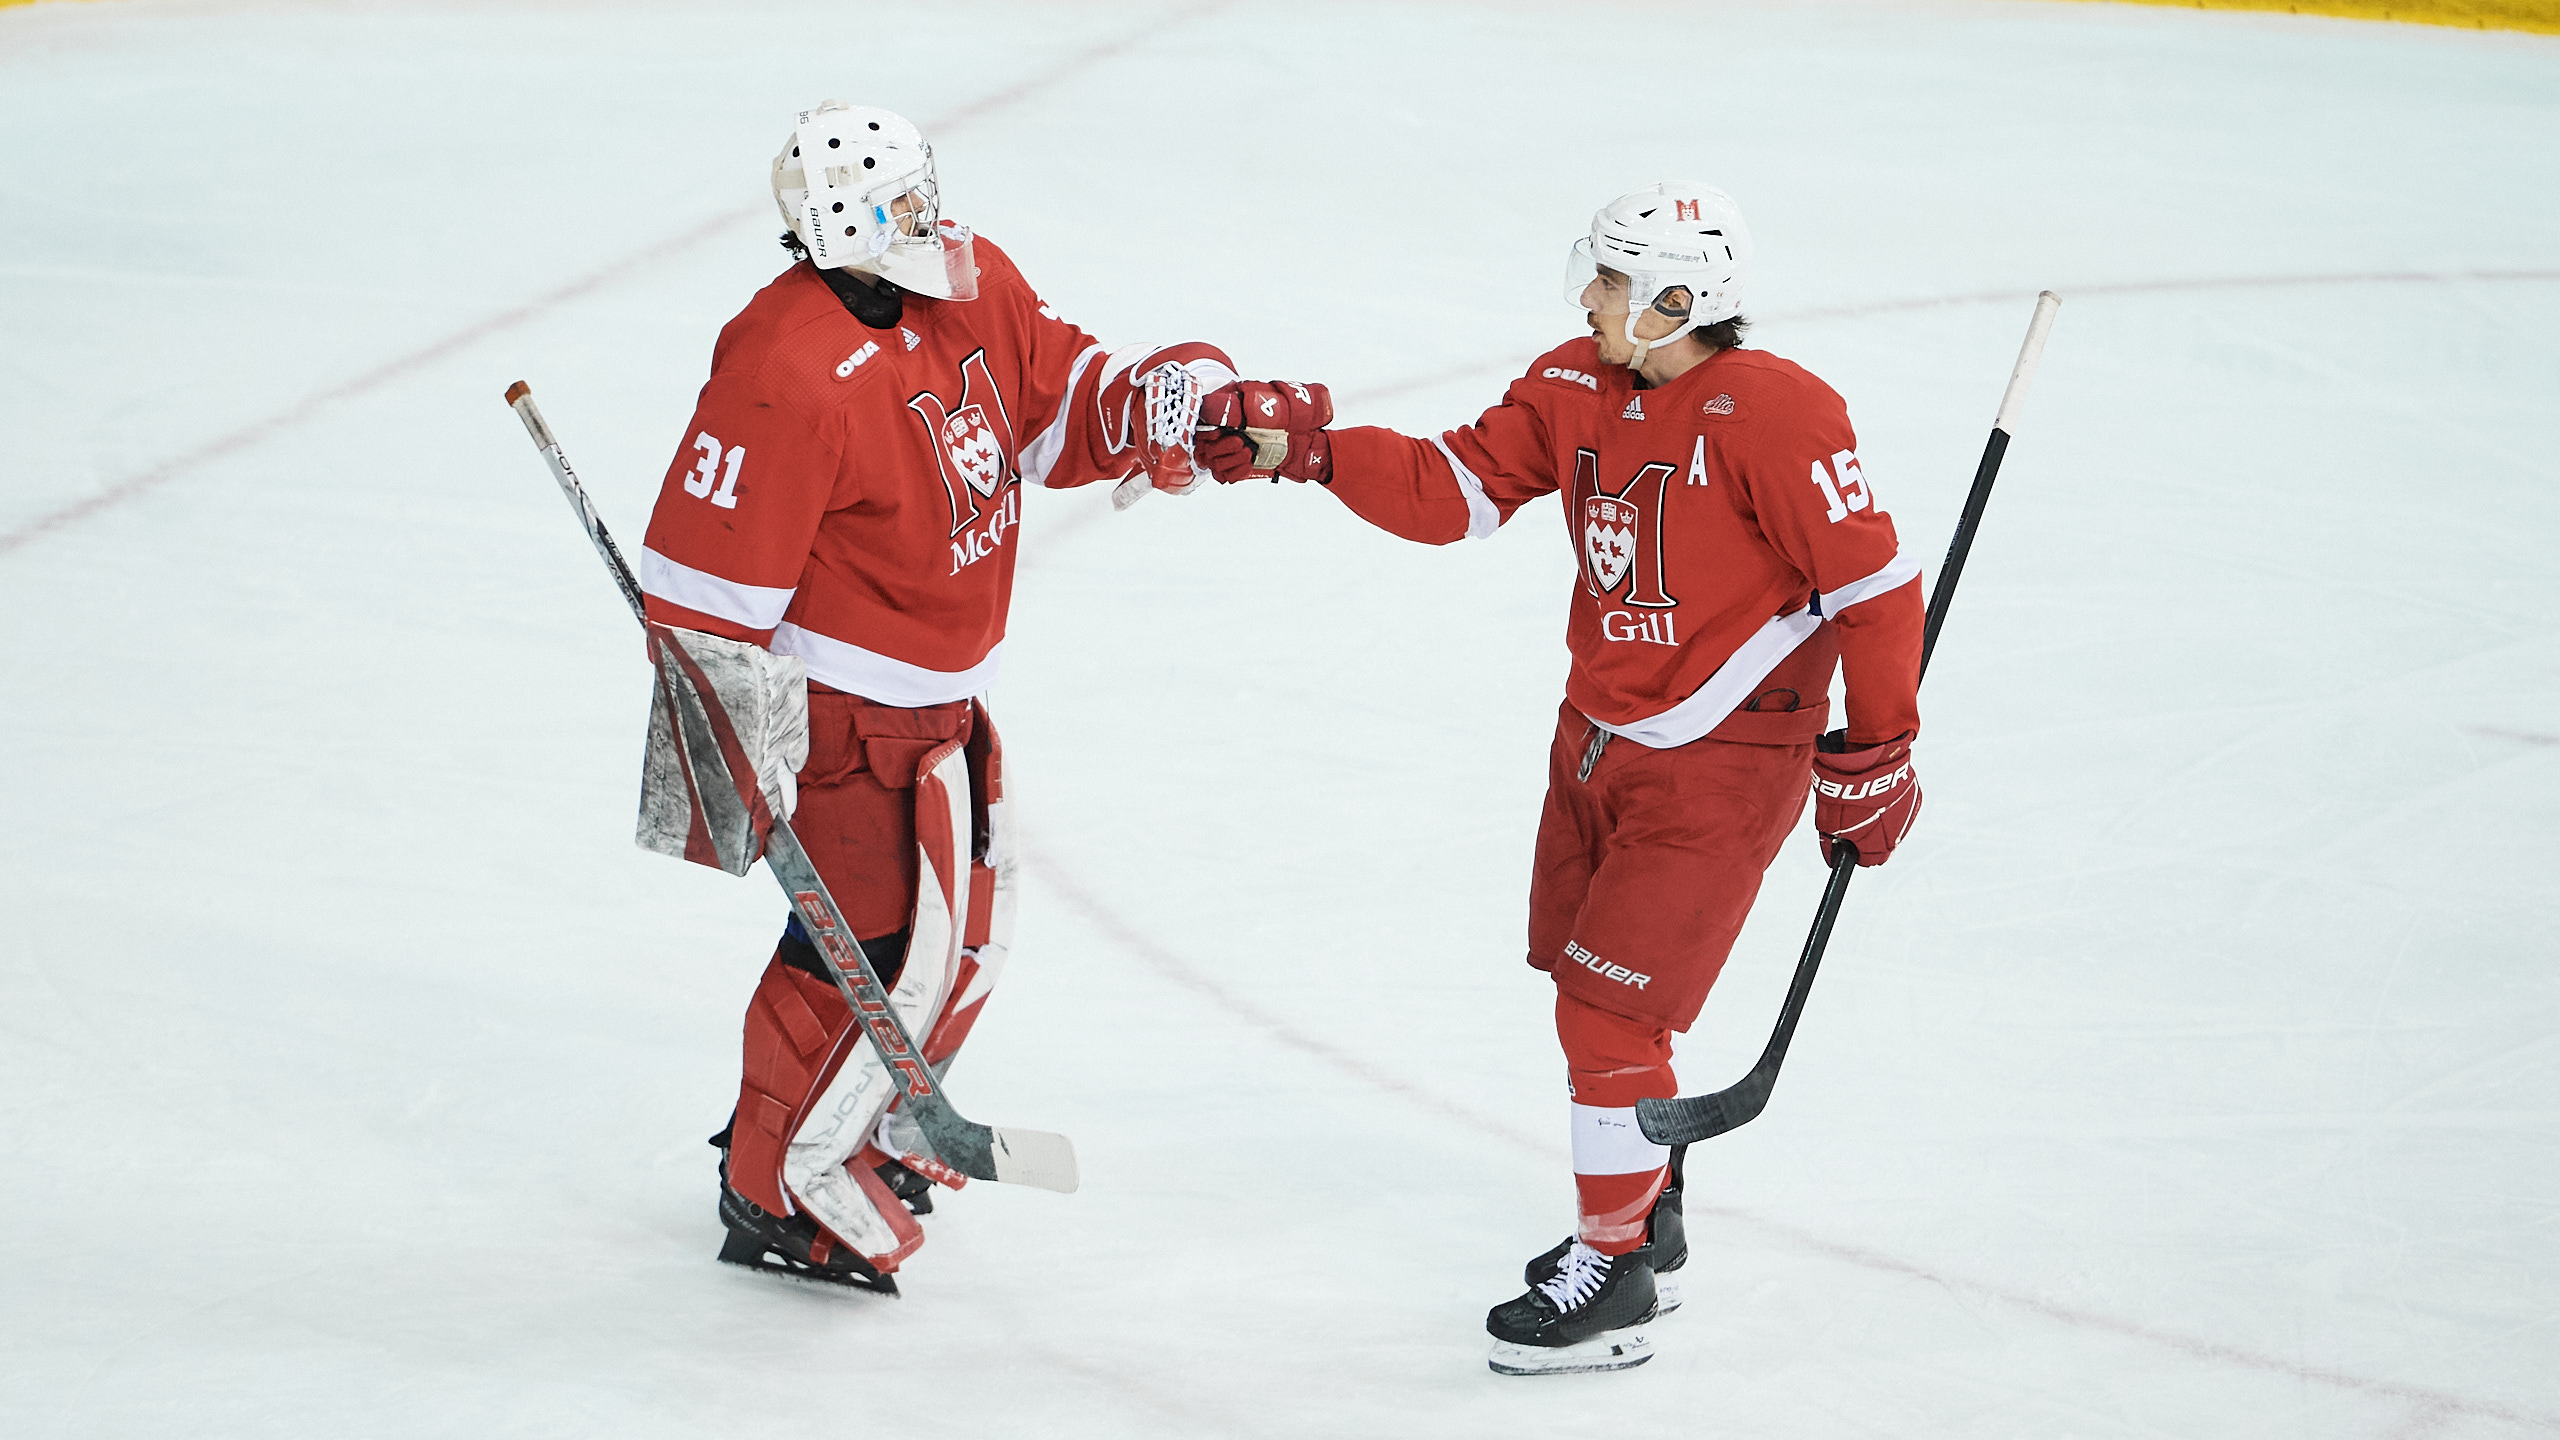 Two McGill University players fist bump on the ice